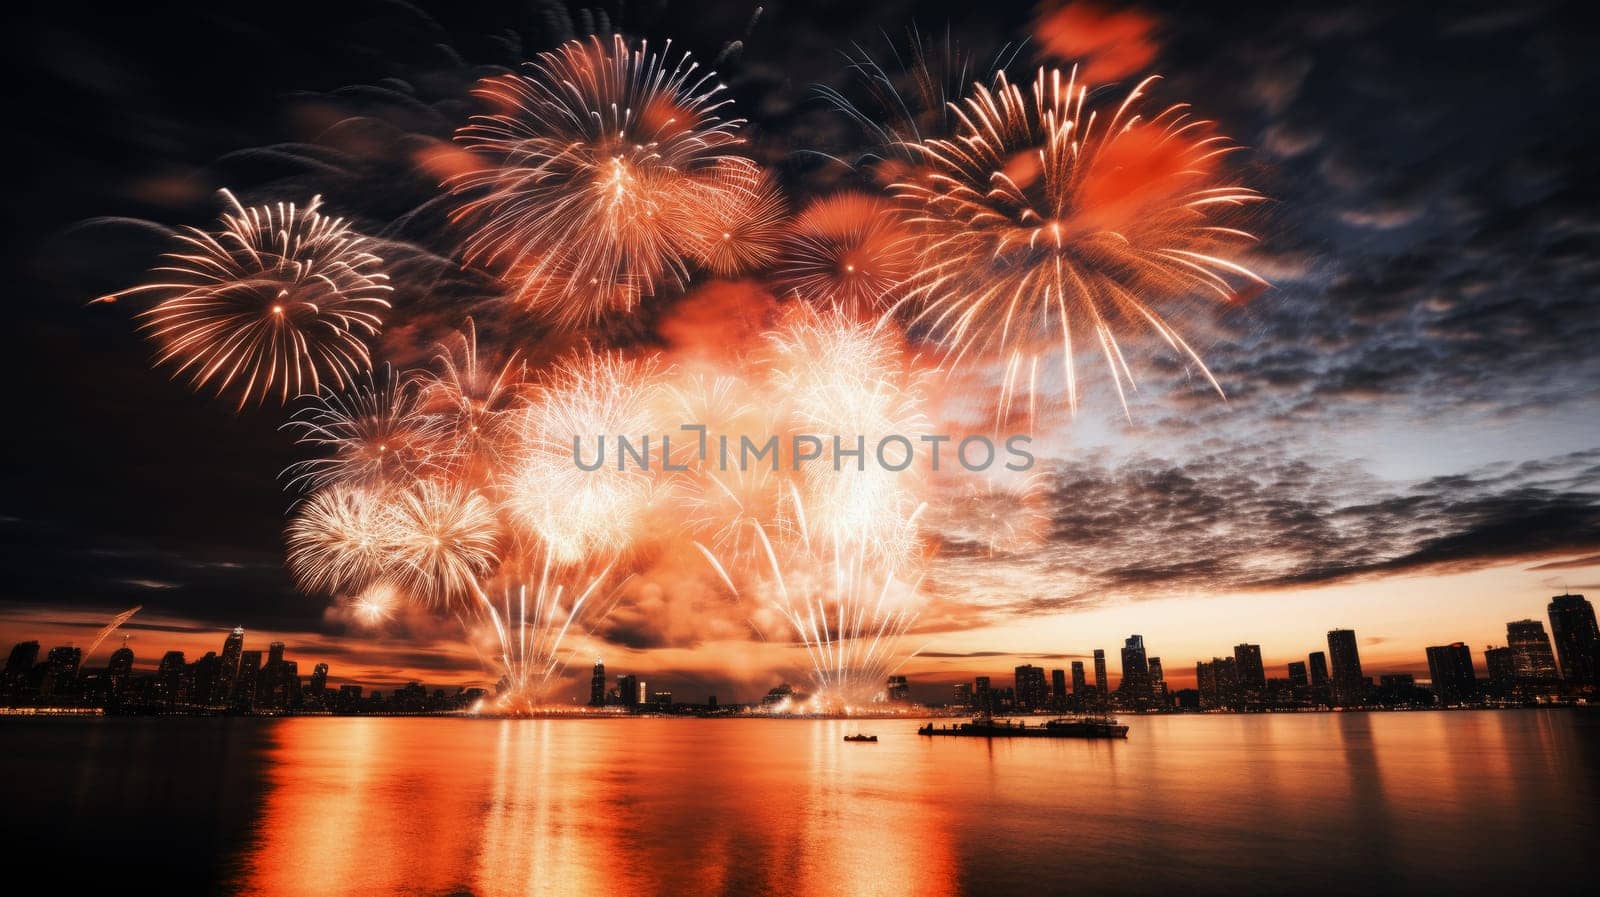 Firework explosion in the night sky celebrating happy new year 2024 by biancoblue